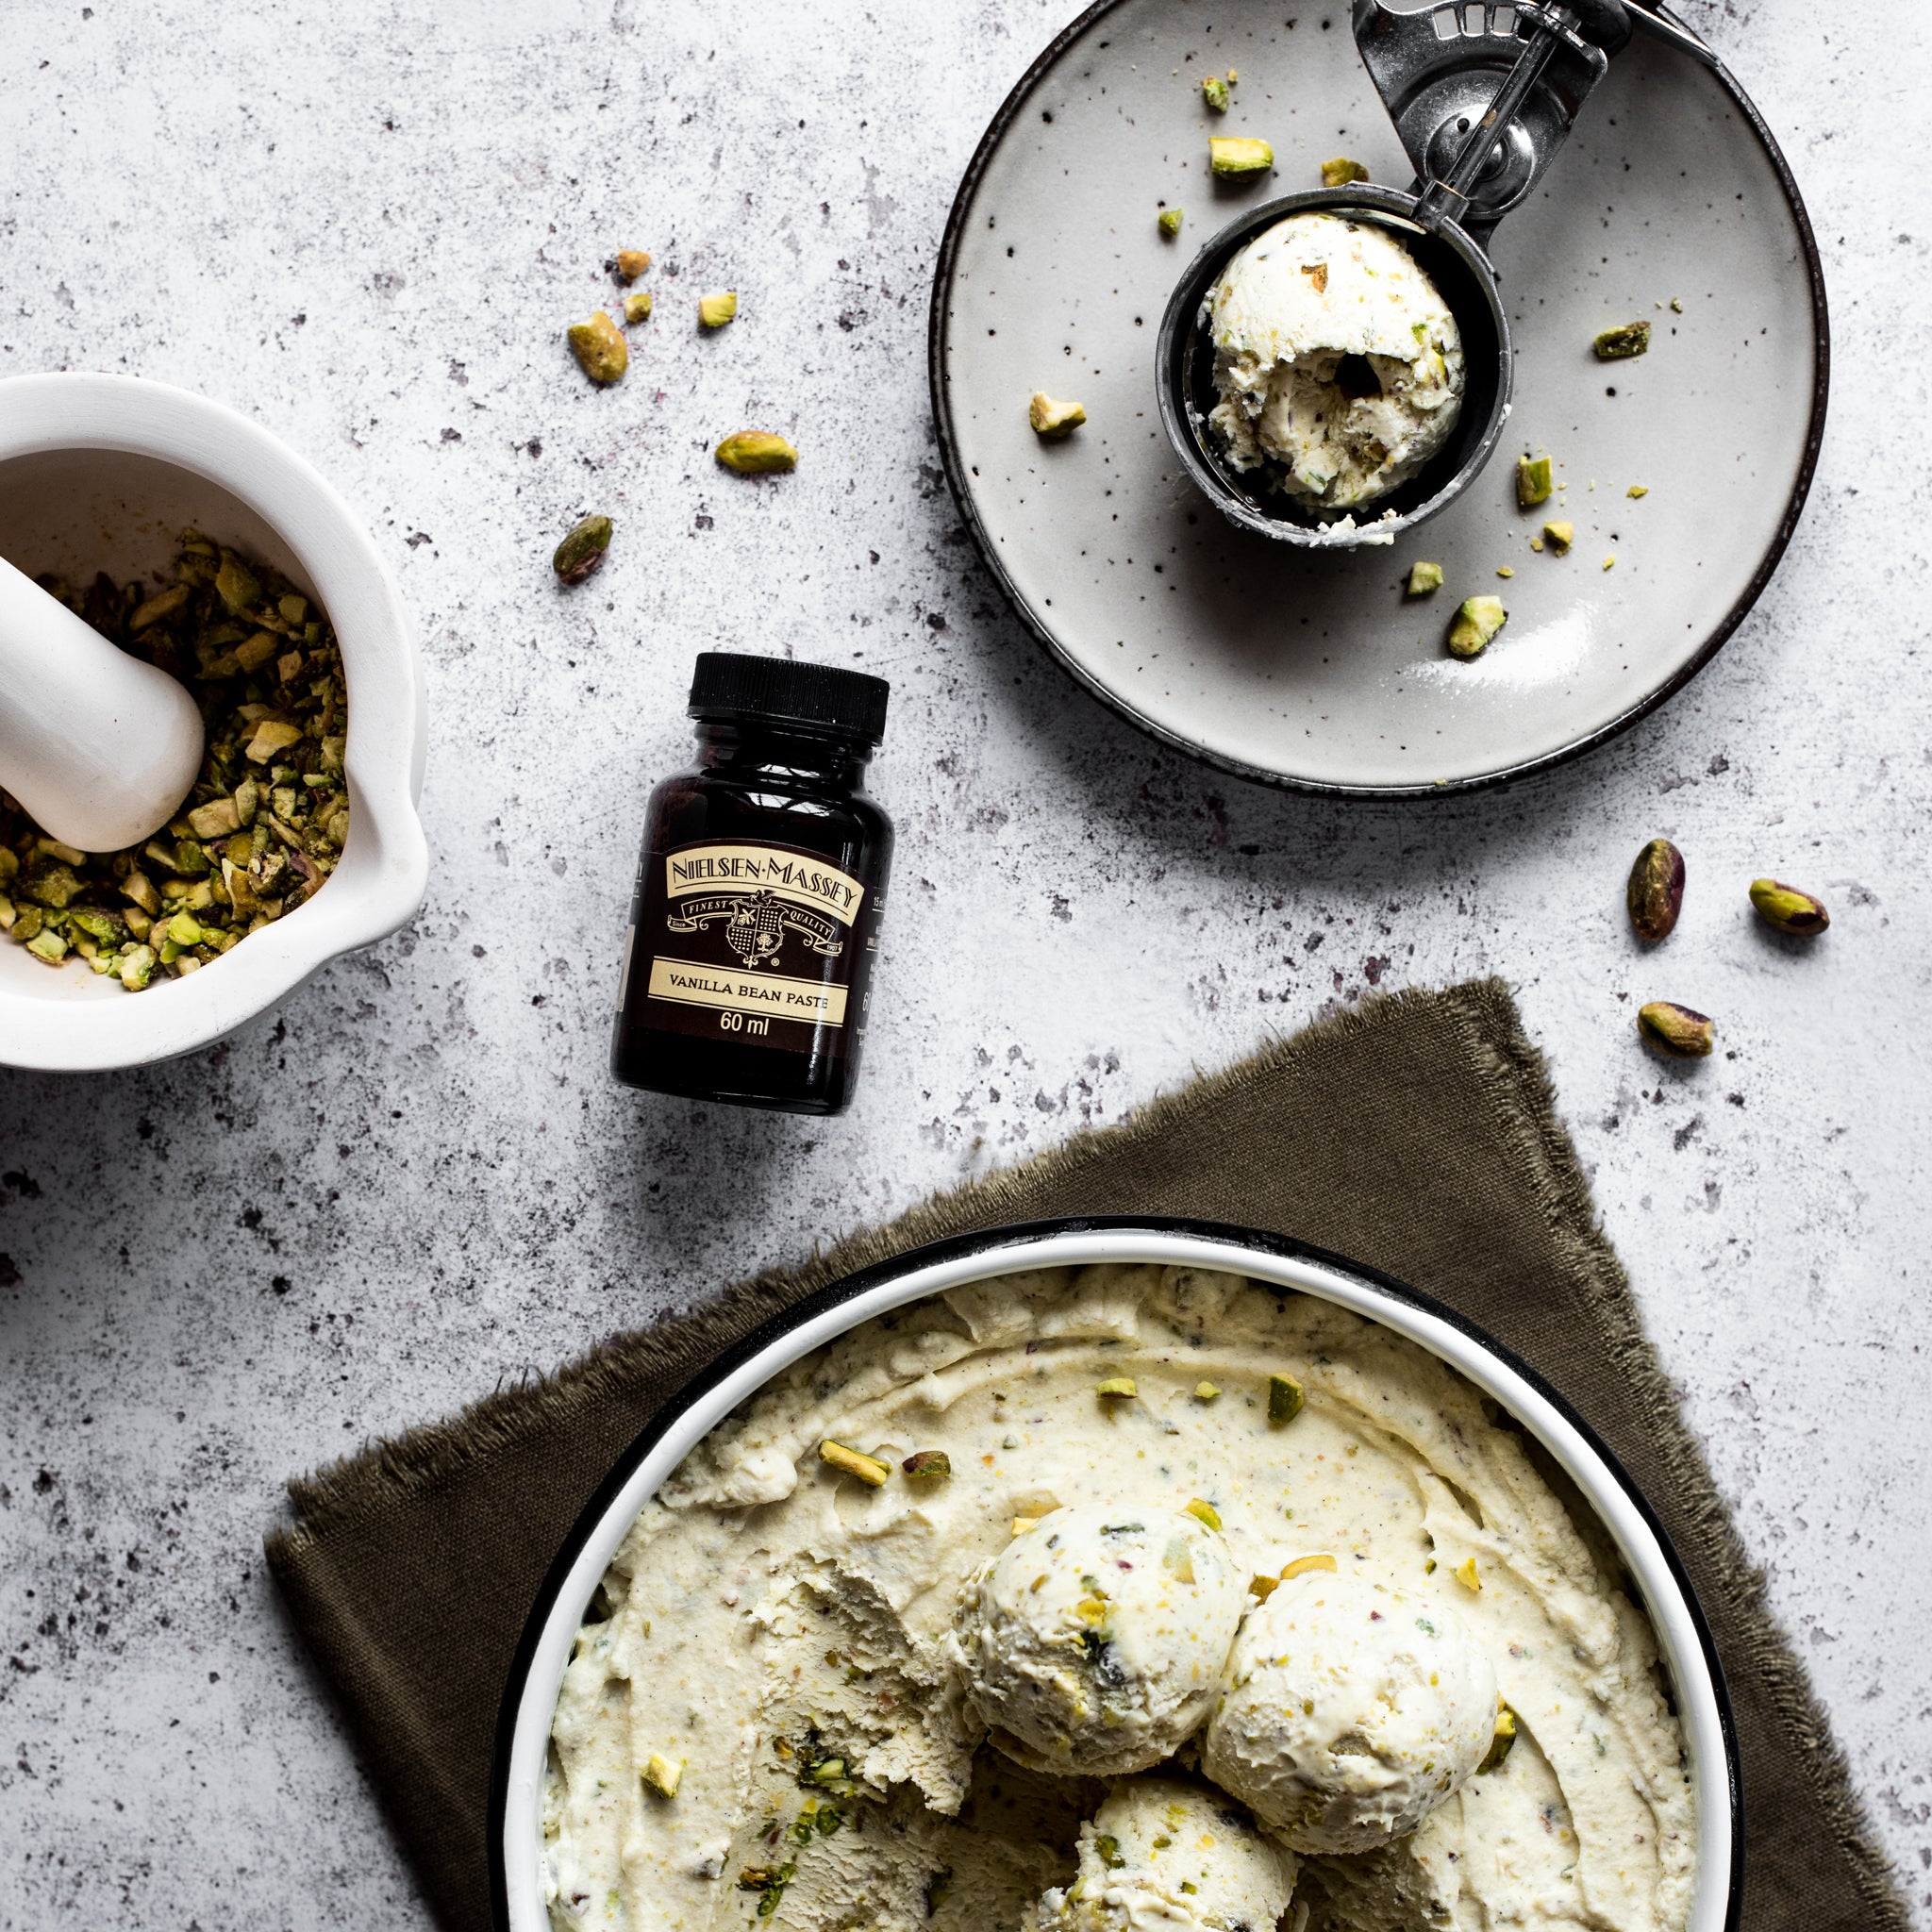 Bowl of pistachio ice cream, surrounded by crushed pistachios and a bottle of vanilla essence 